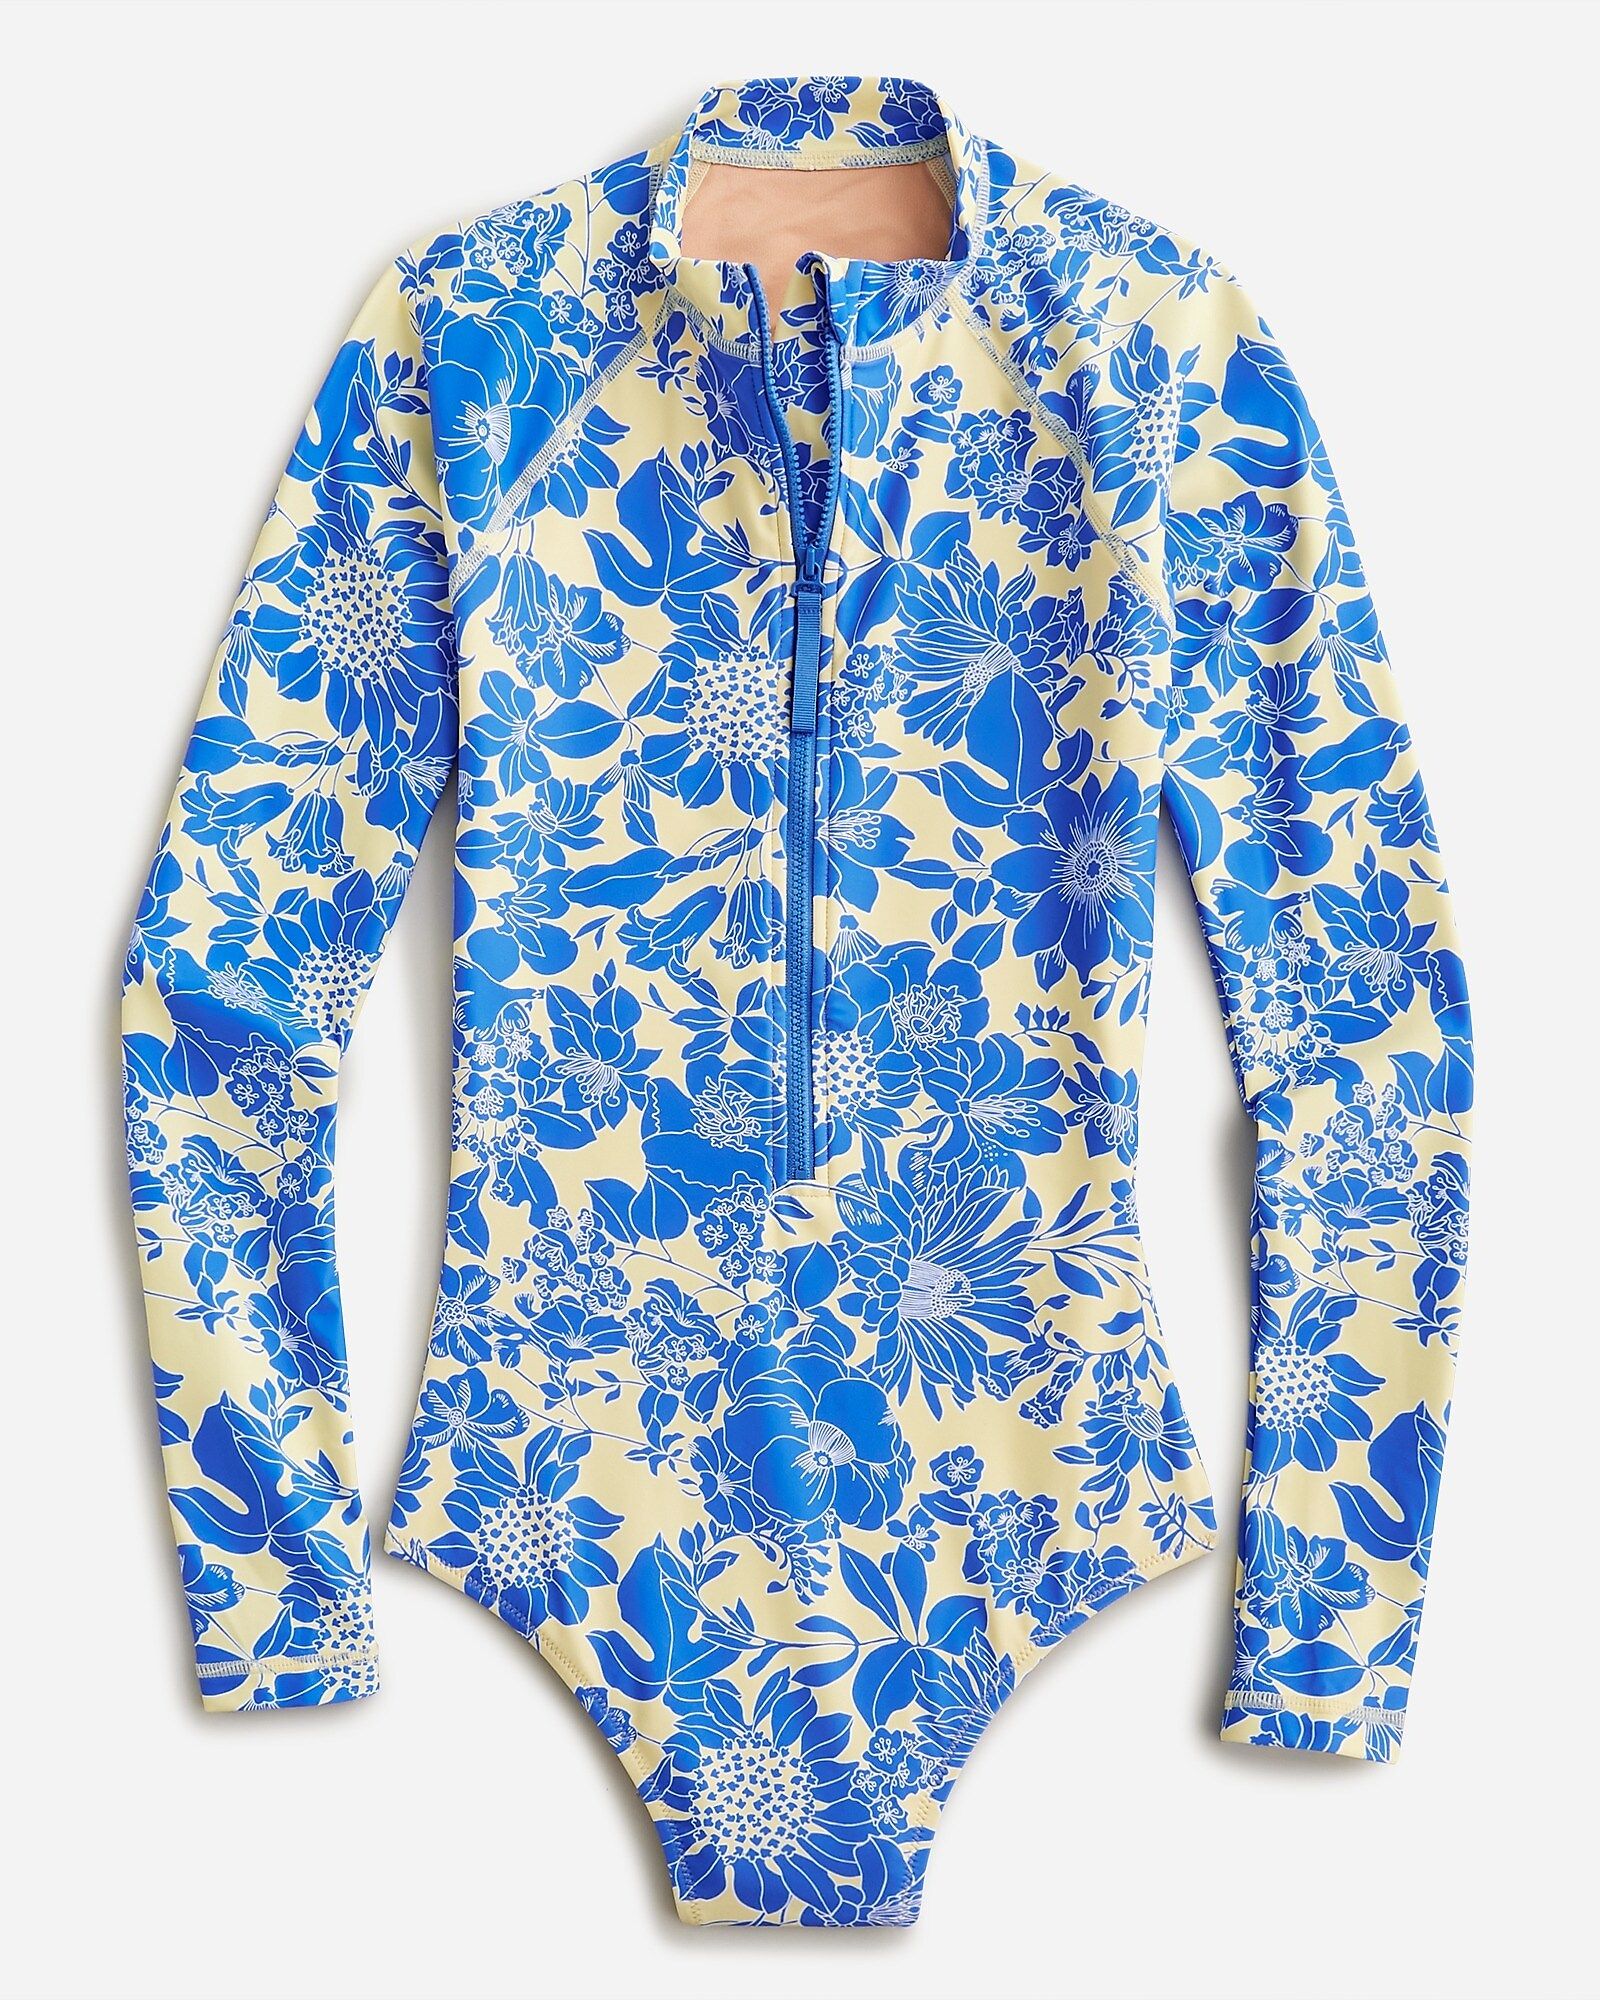 Long-sleeve one-piece rash guard in blue floral | J.Crew US